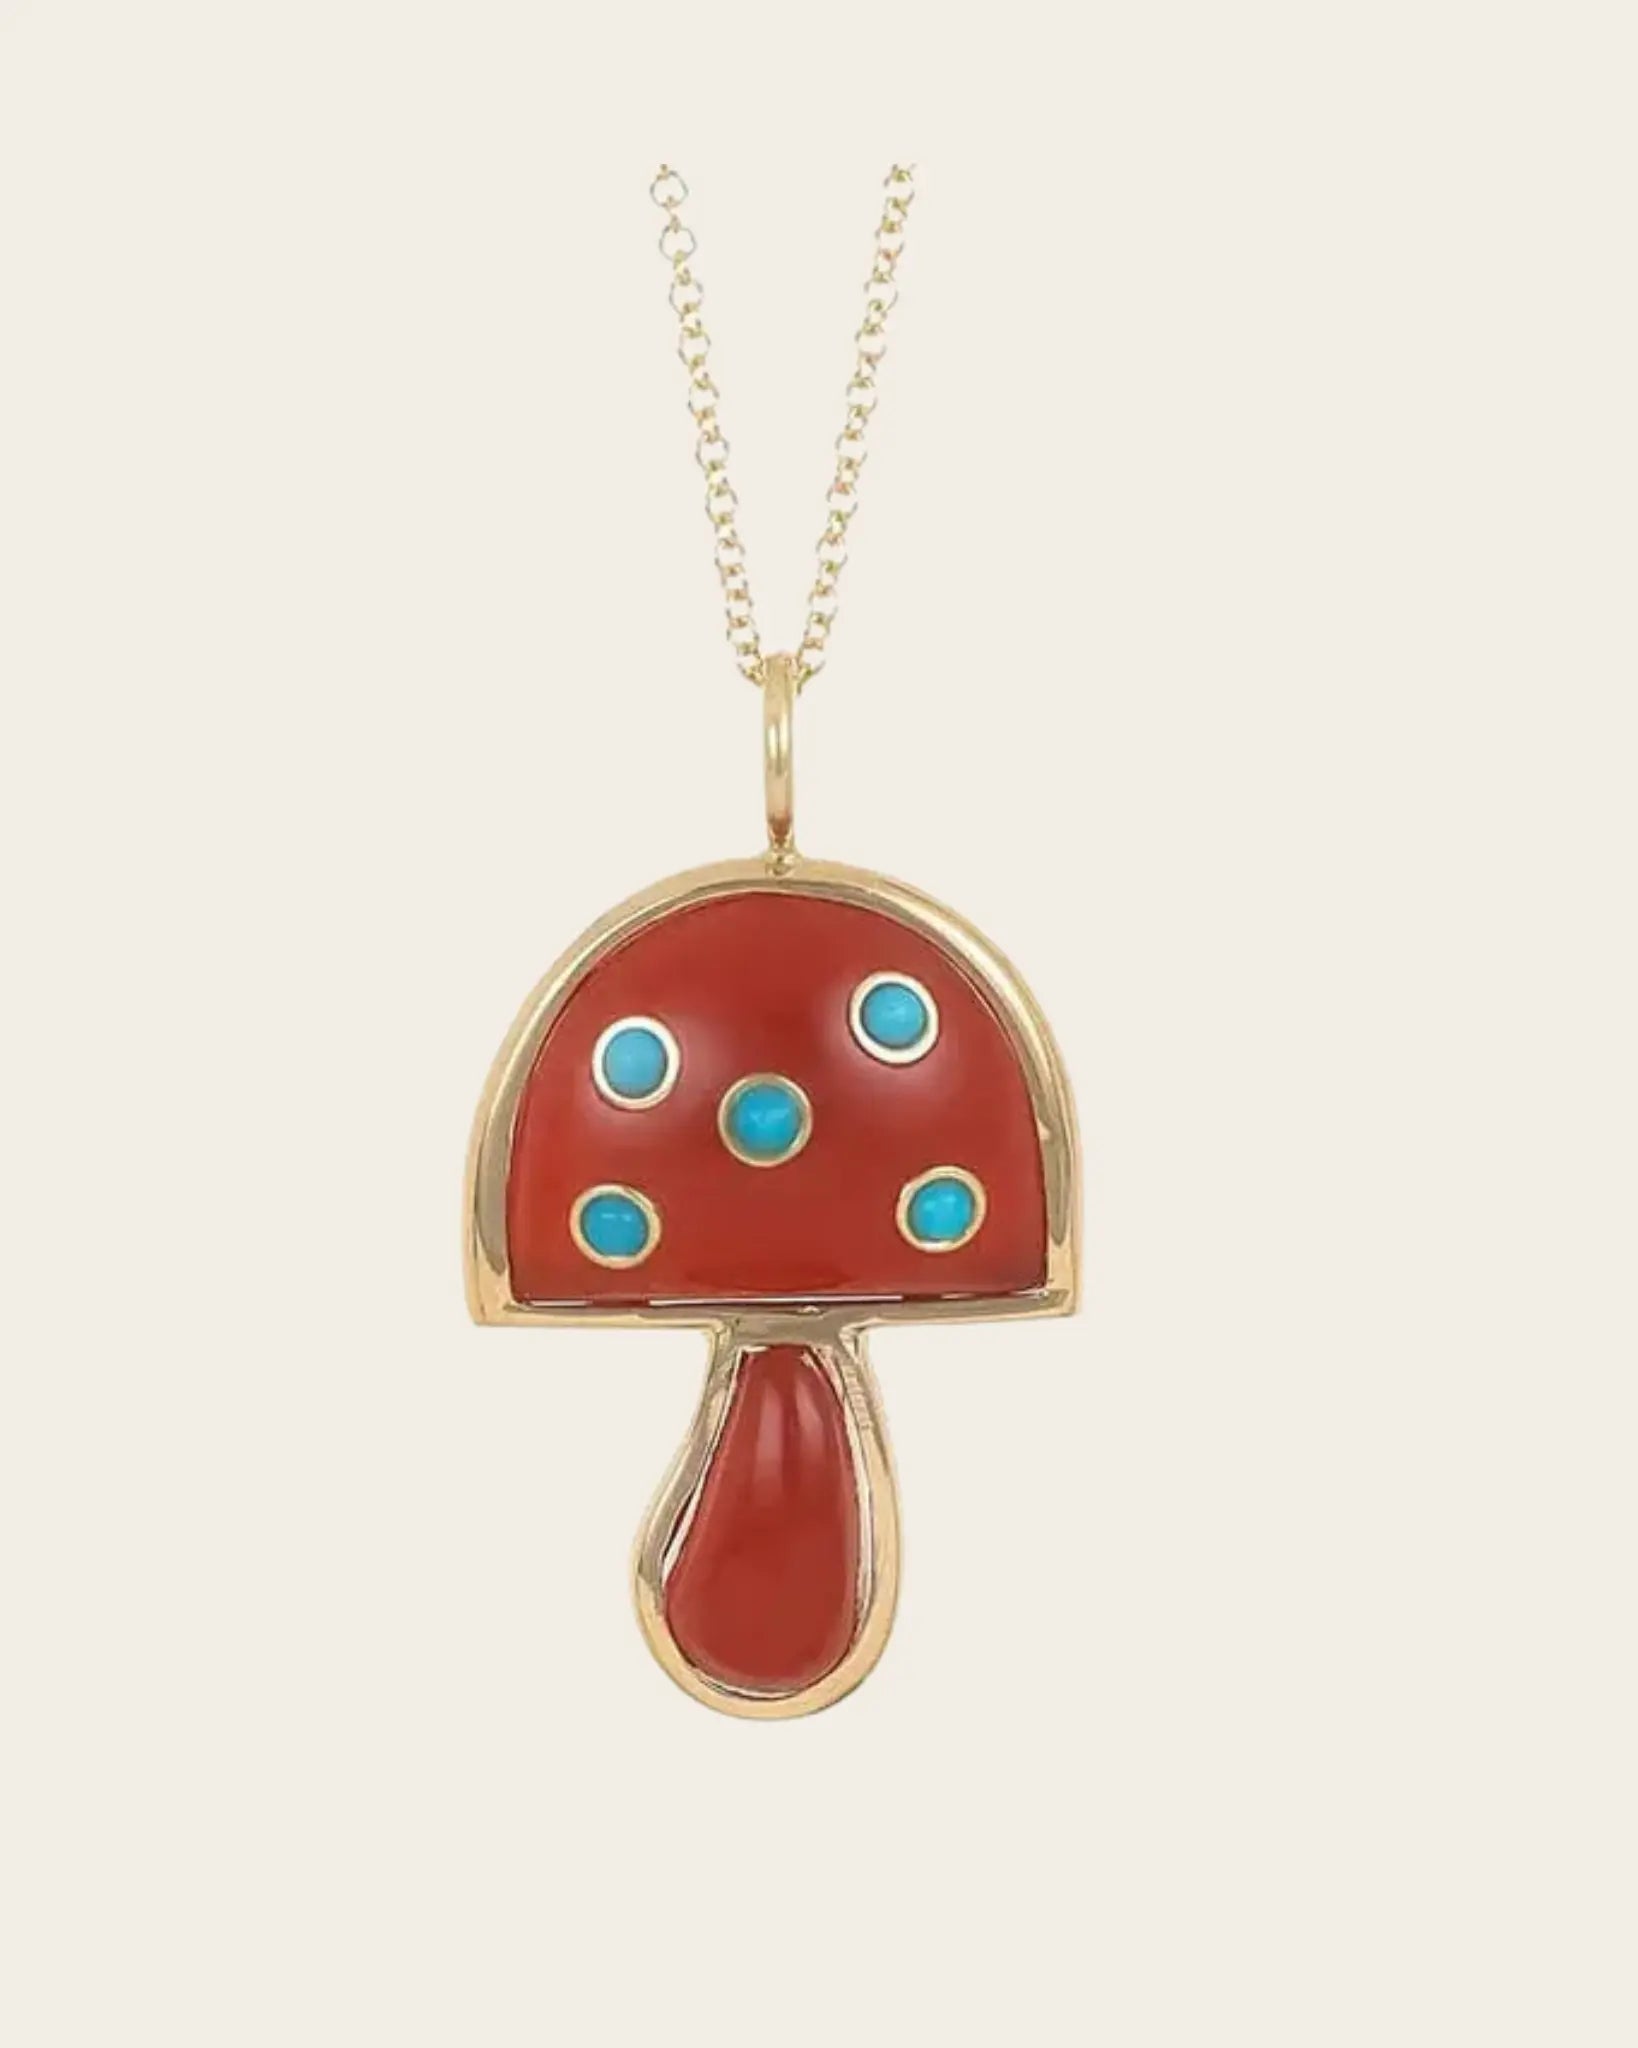 Brent Neale Carnelian and Turquoise Mini Mushroom Necklace Brent Neale Carnelian and Turquoise Mini Mushroom Necklace Brent Neale Brent Neale  Squash Blossom Vail